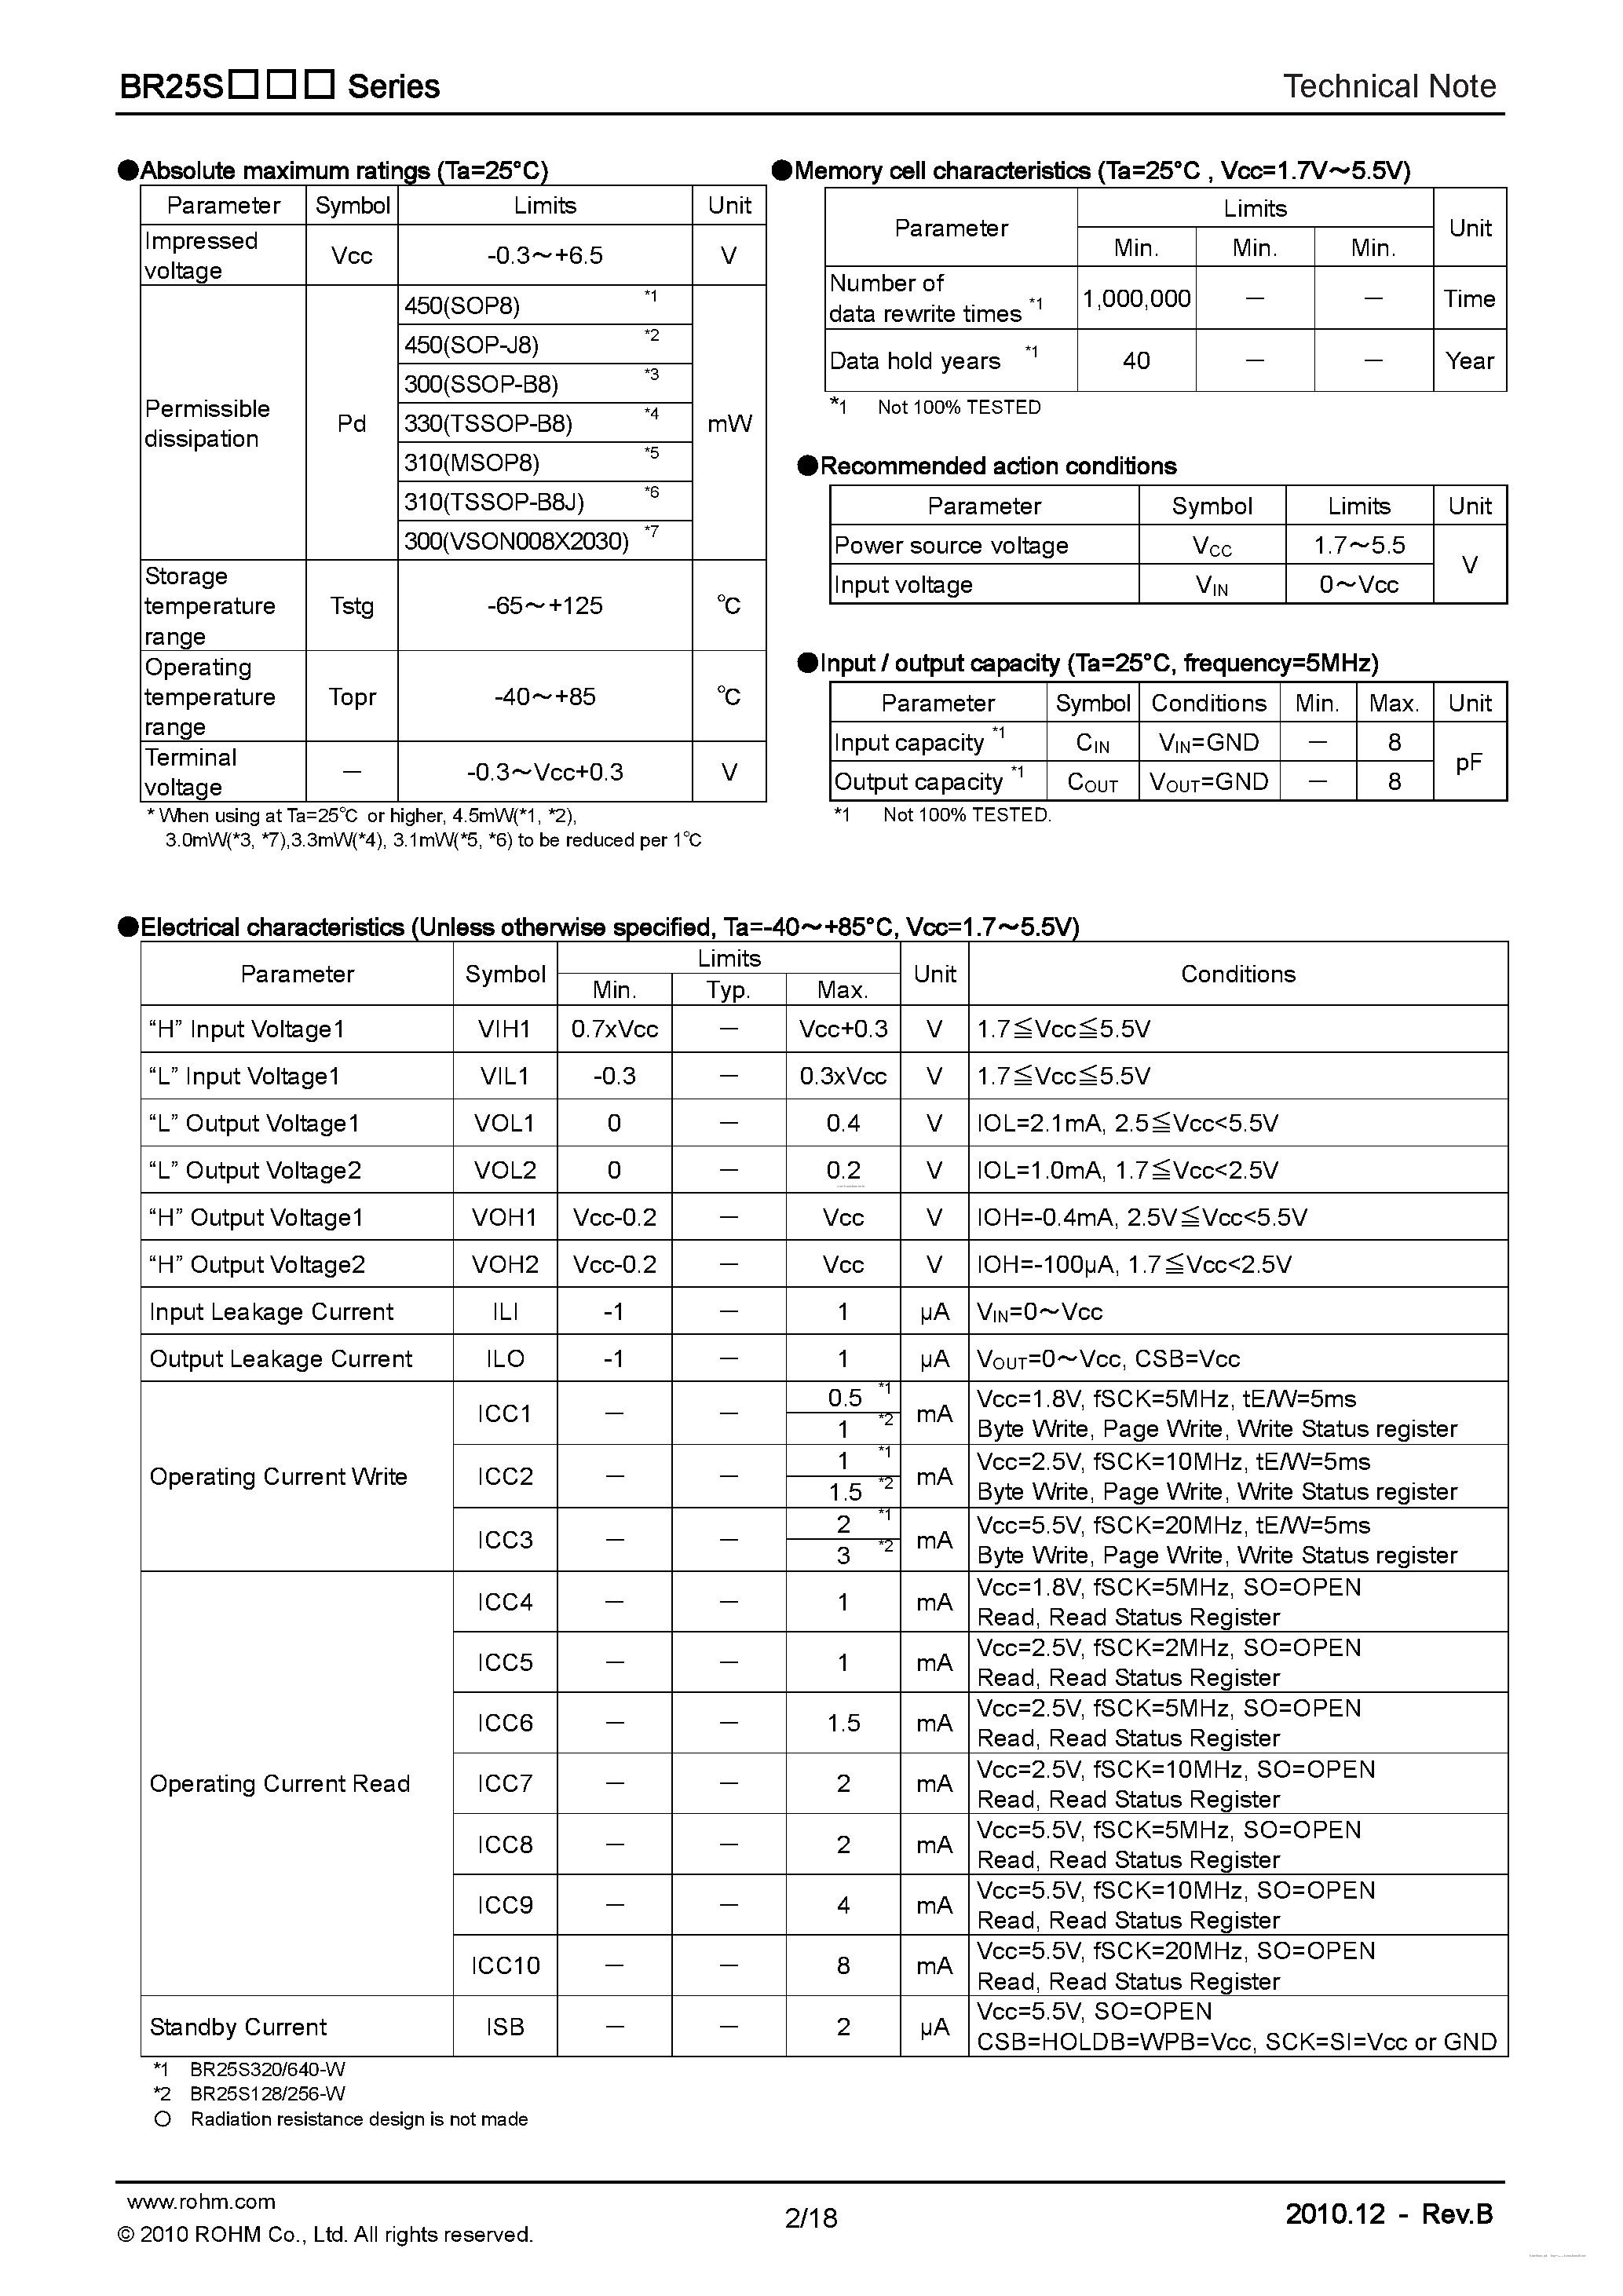 Datasheet BR25S128-W - SPI BUS page 2